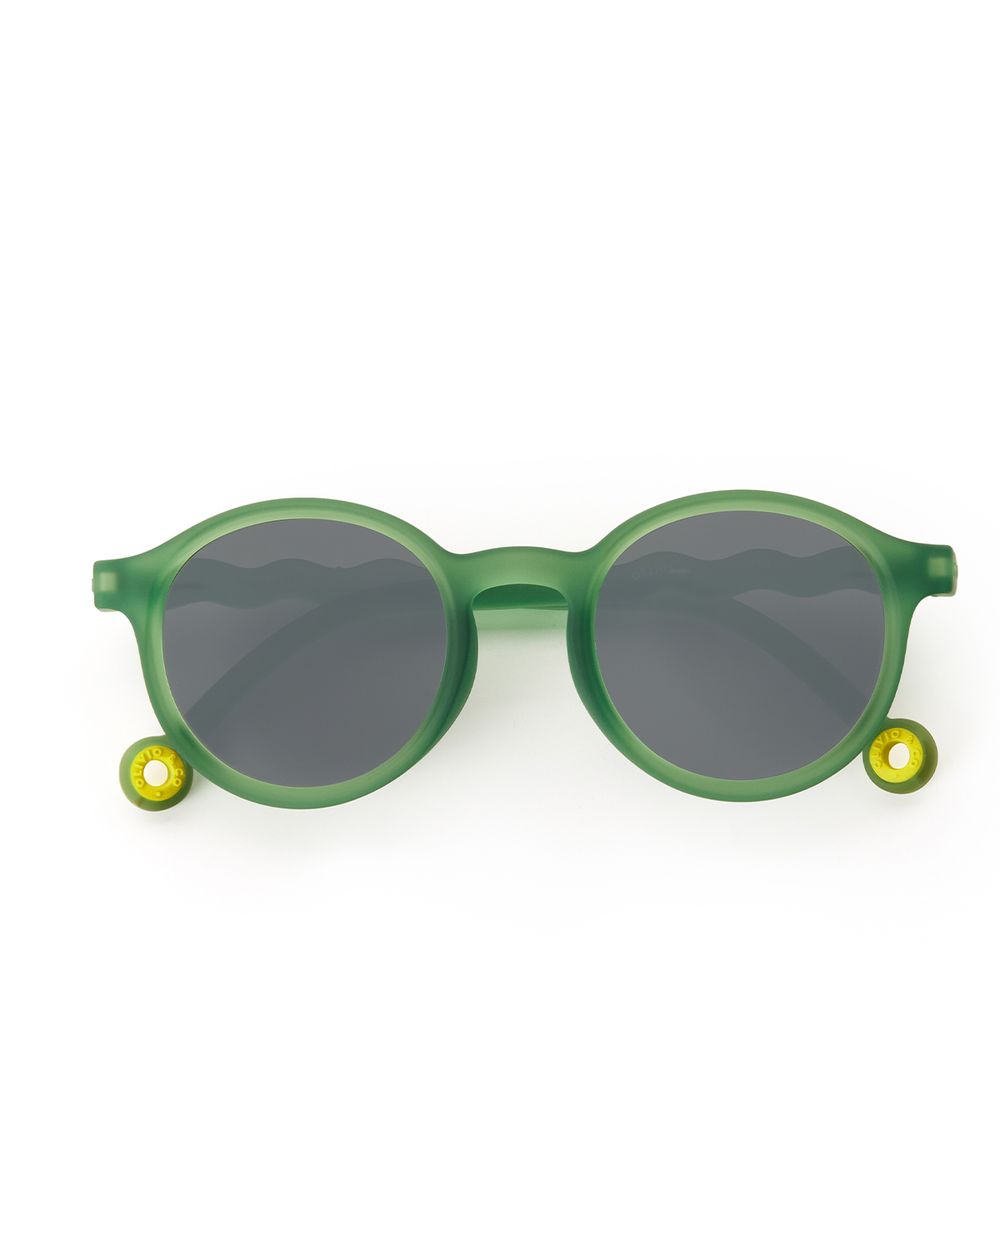 Kids Oval Sunglasses Olive Green with Polarized